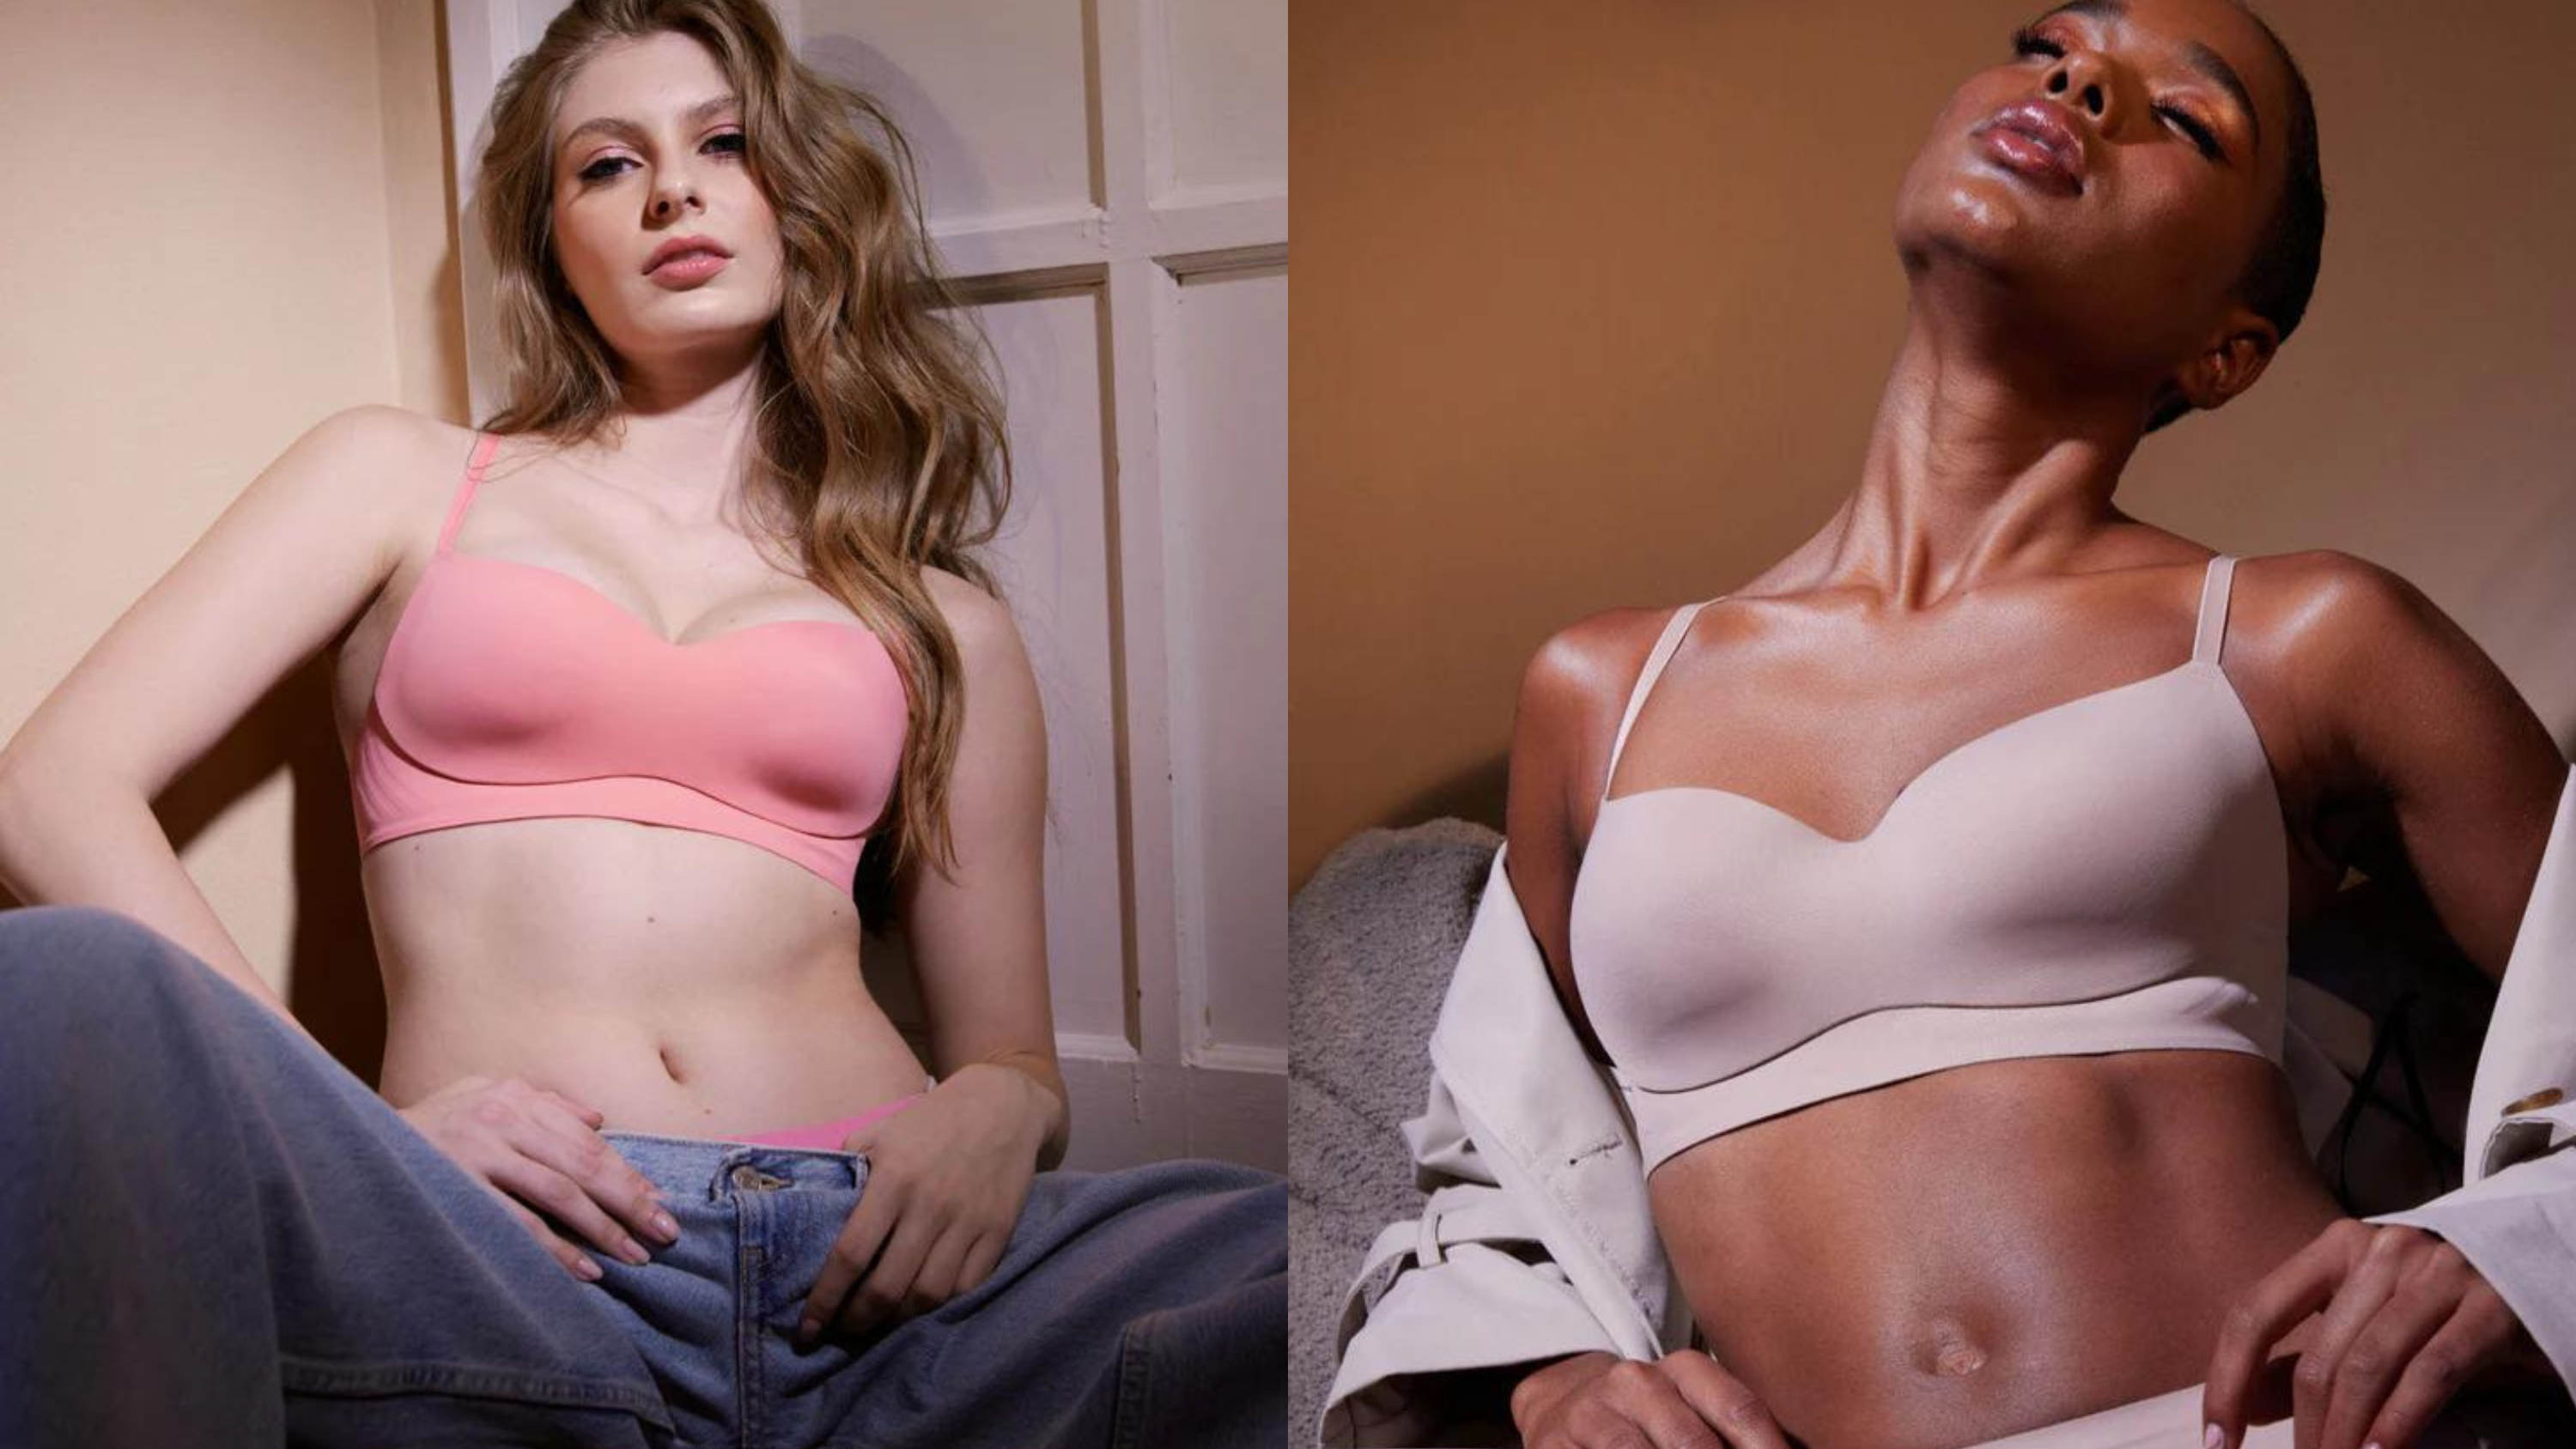 Stay comfortable all day long in Eby's newest, seamless bra